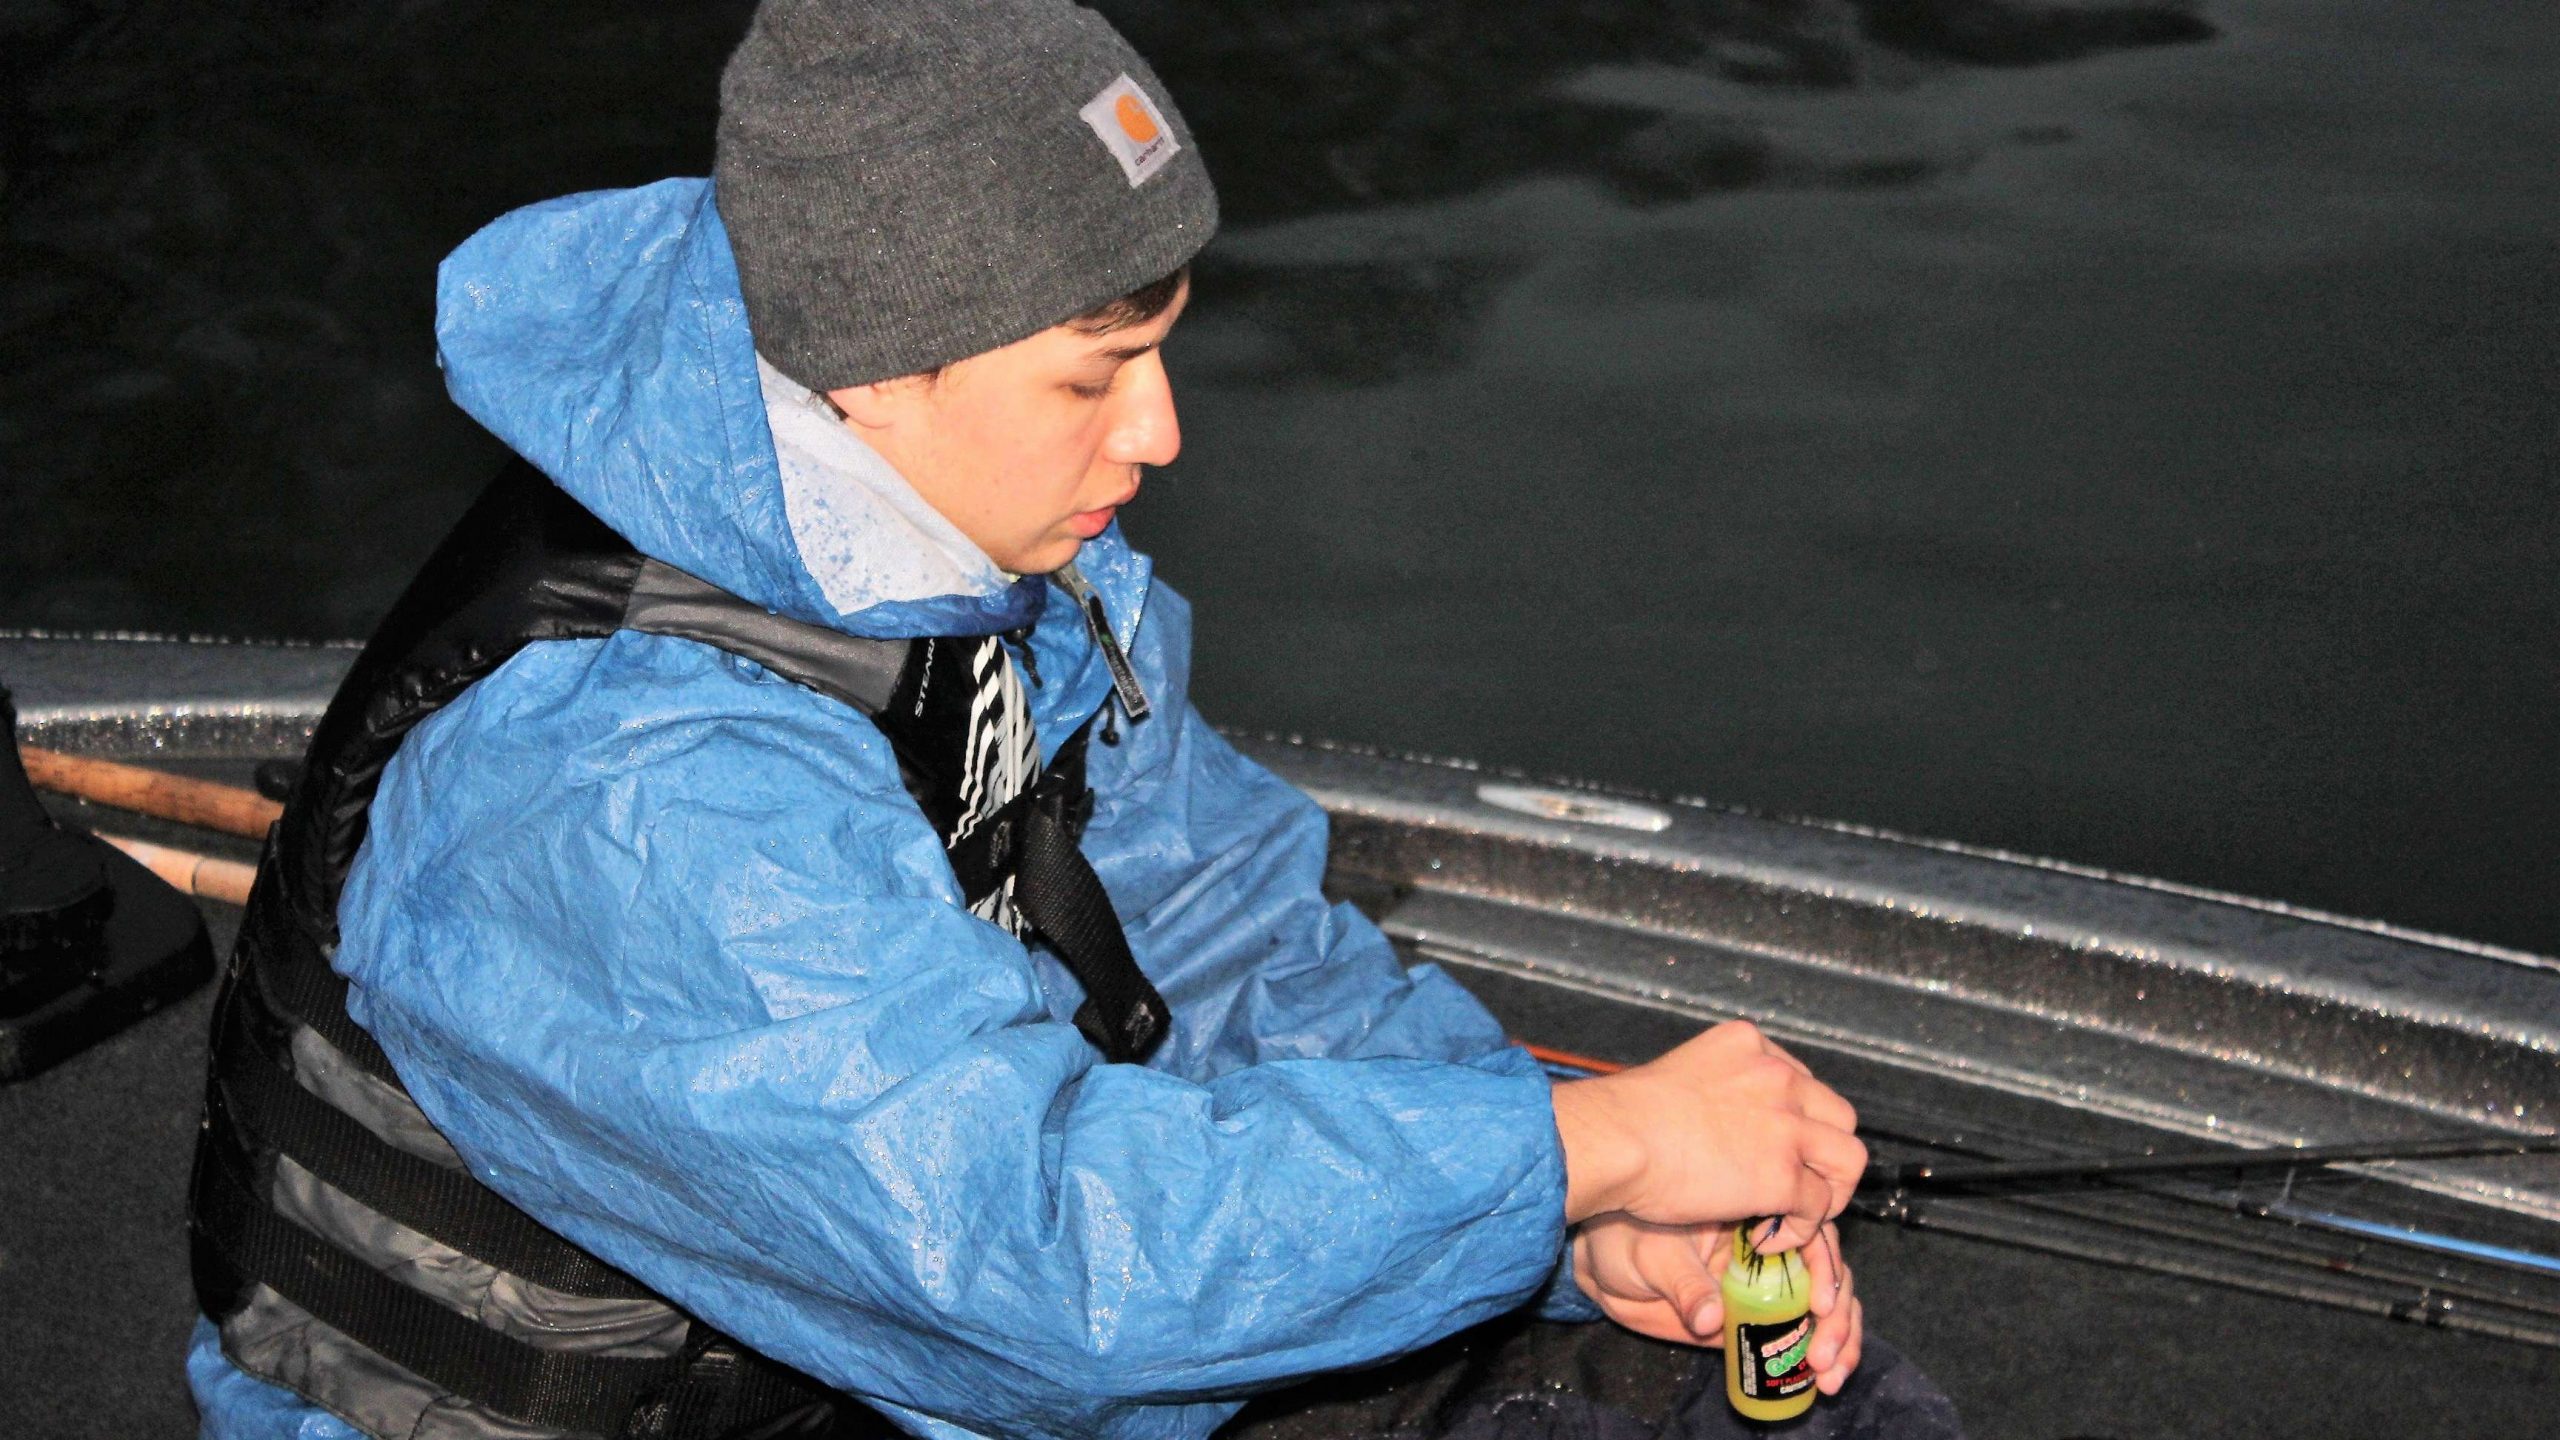 Noah Lewis of the Raintree (Mo.) High School Anglers Club readies a lure for fishing.